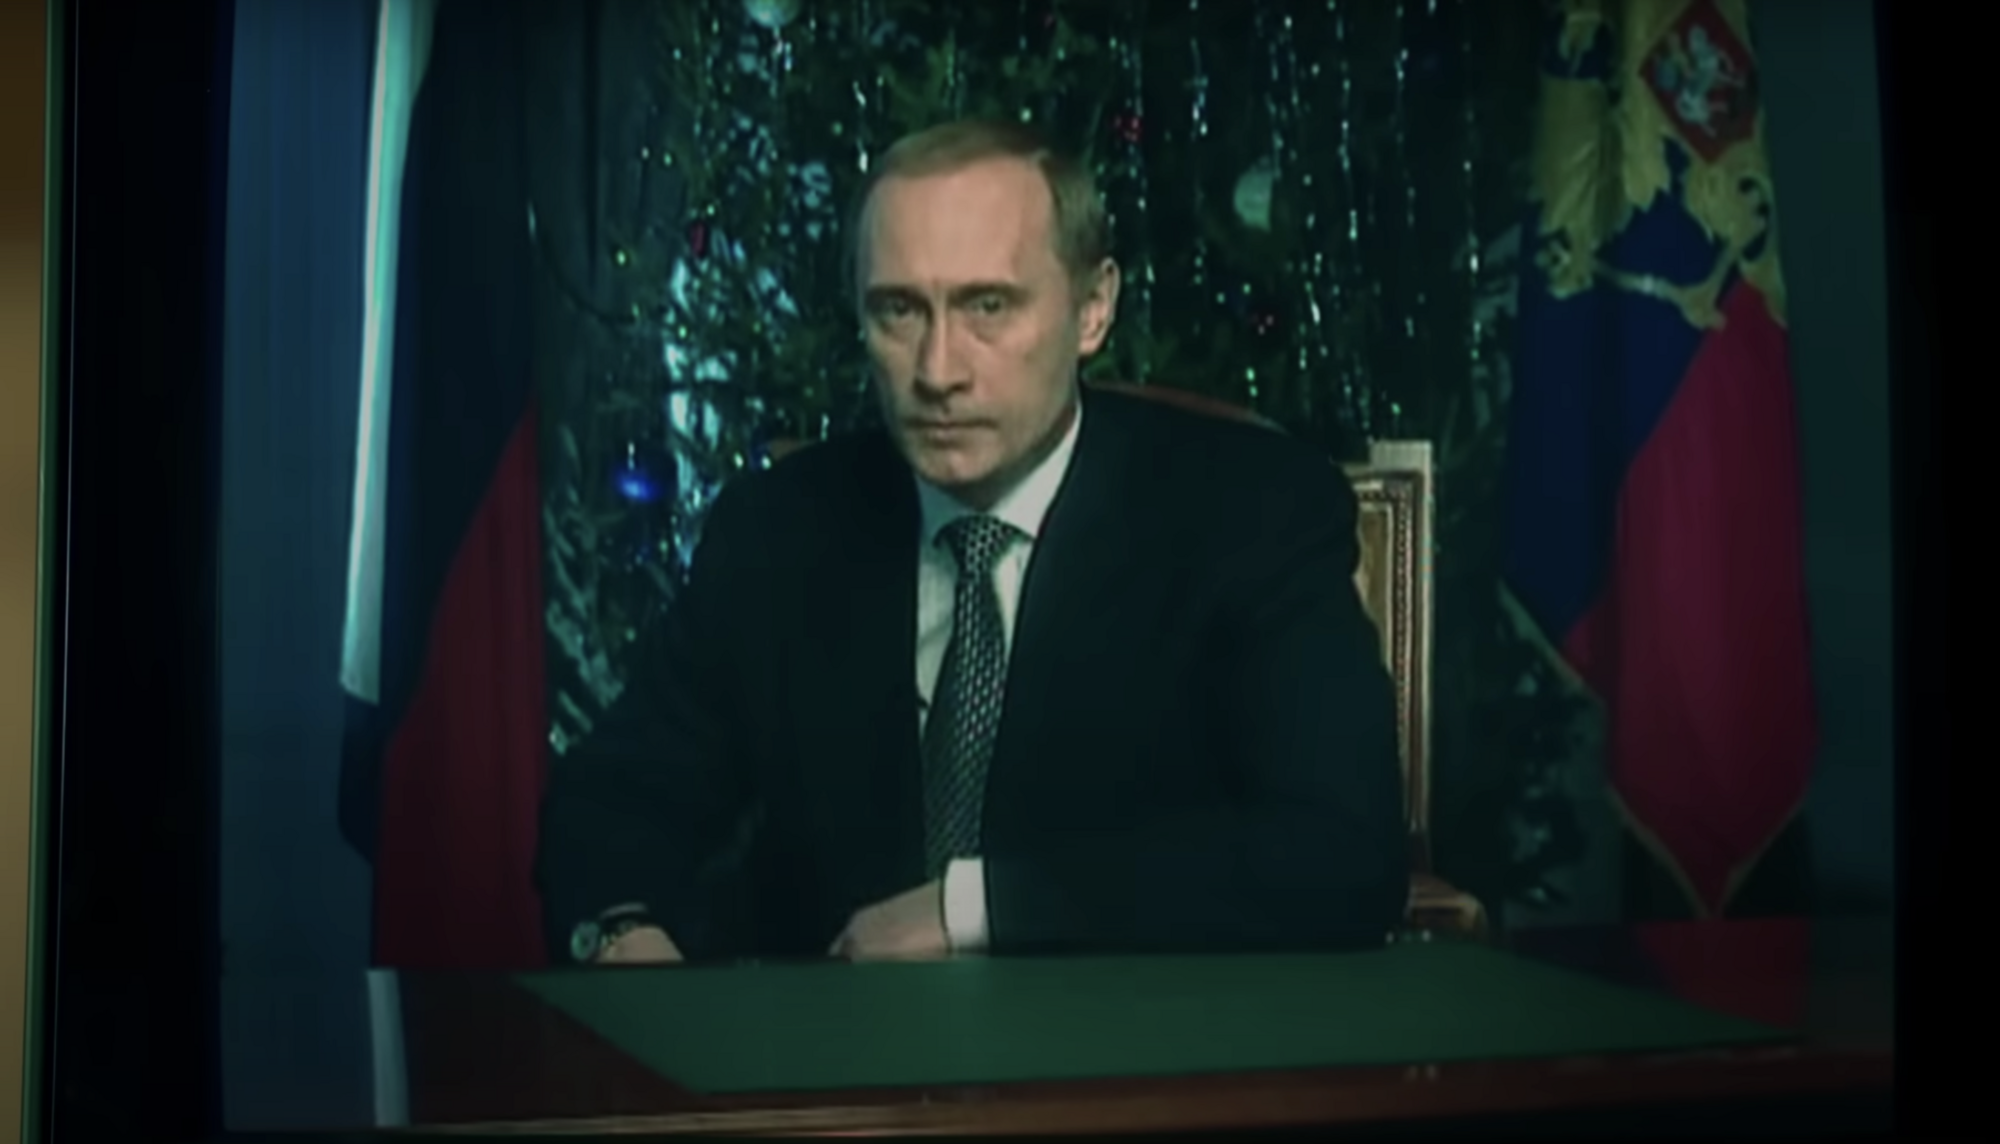 Russia cut out Vladimir Putin's address and jokes about Russians from Roman Polanski's film ''The Palace''